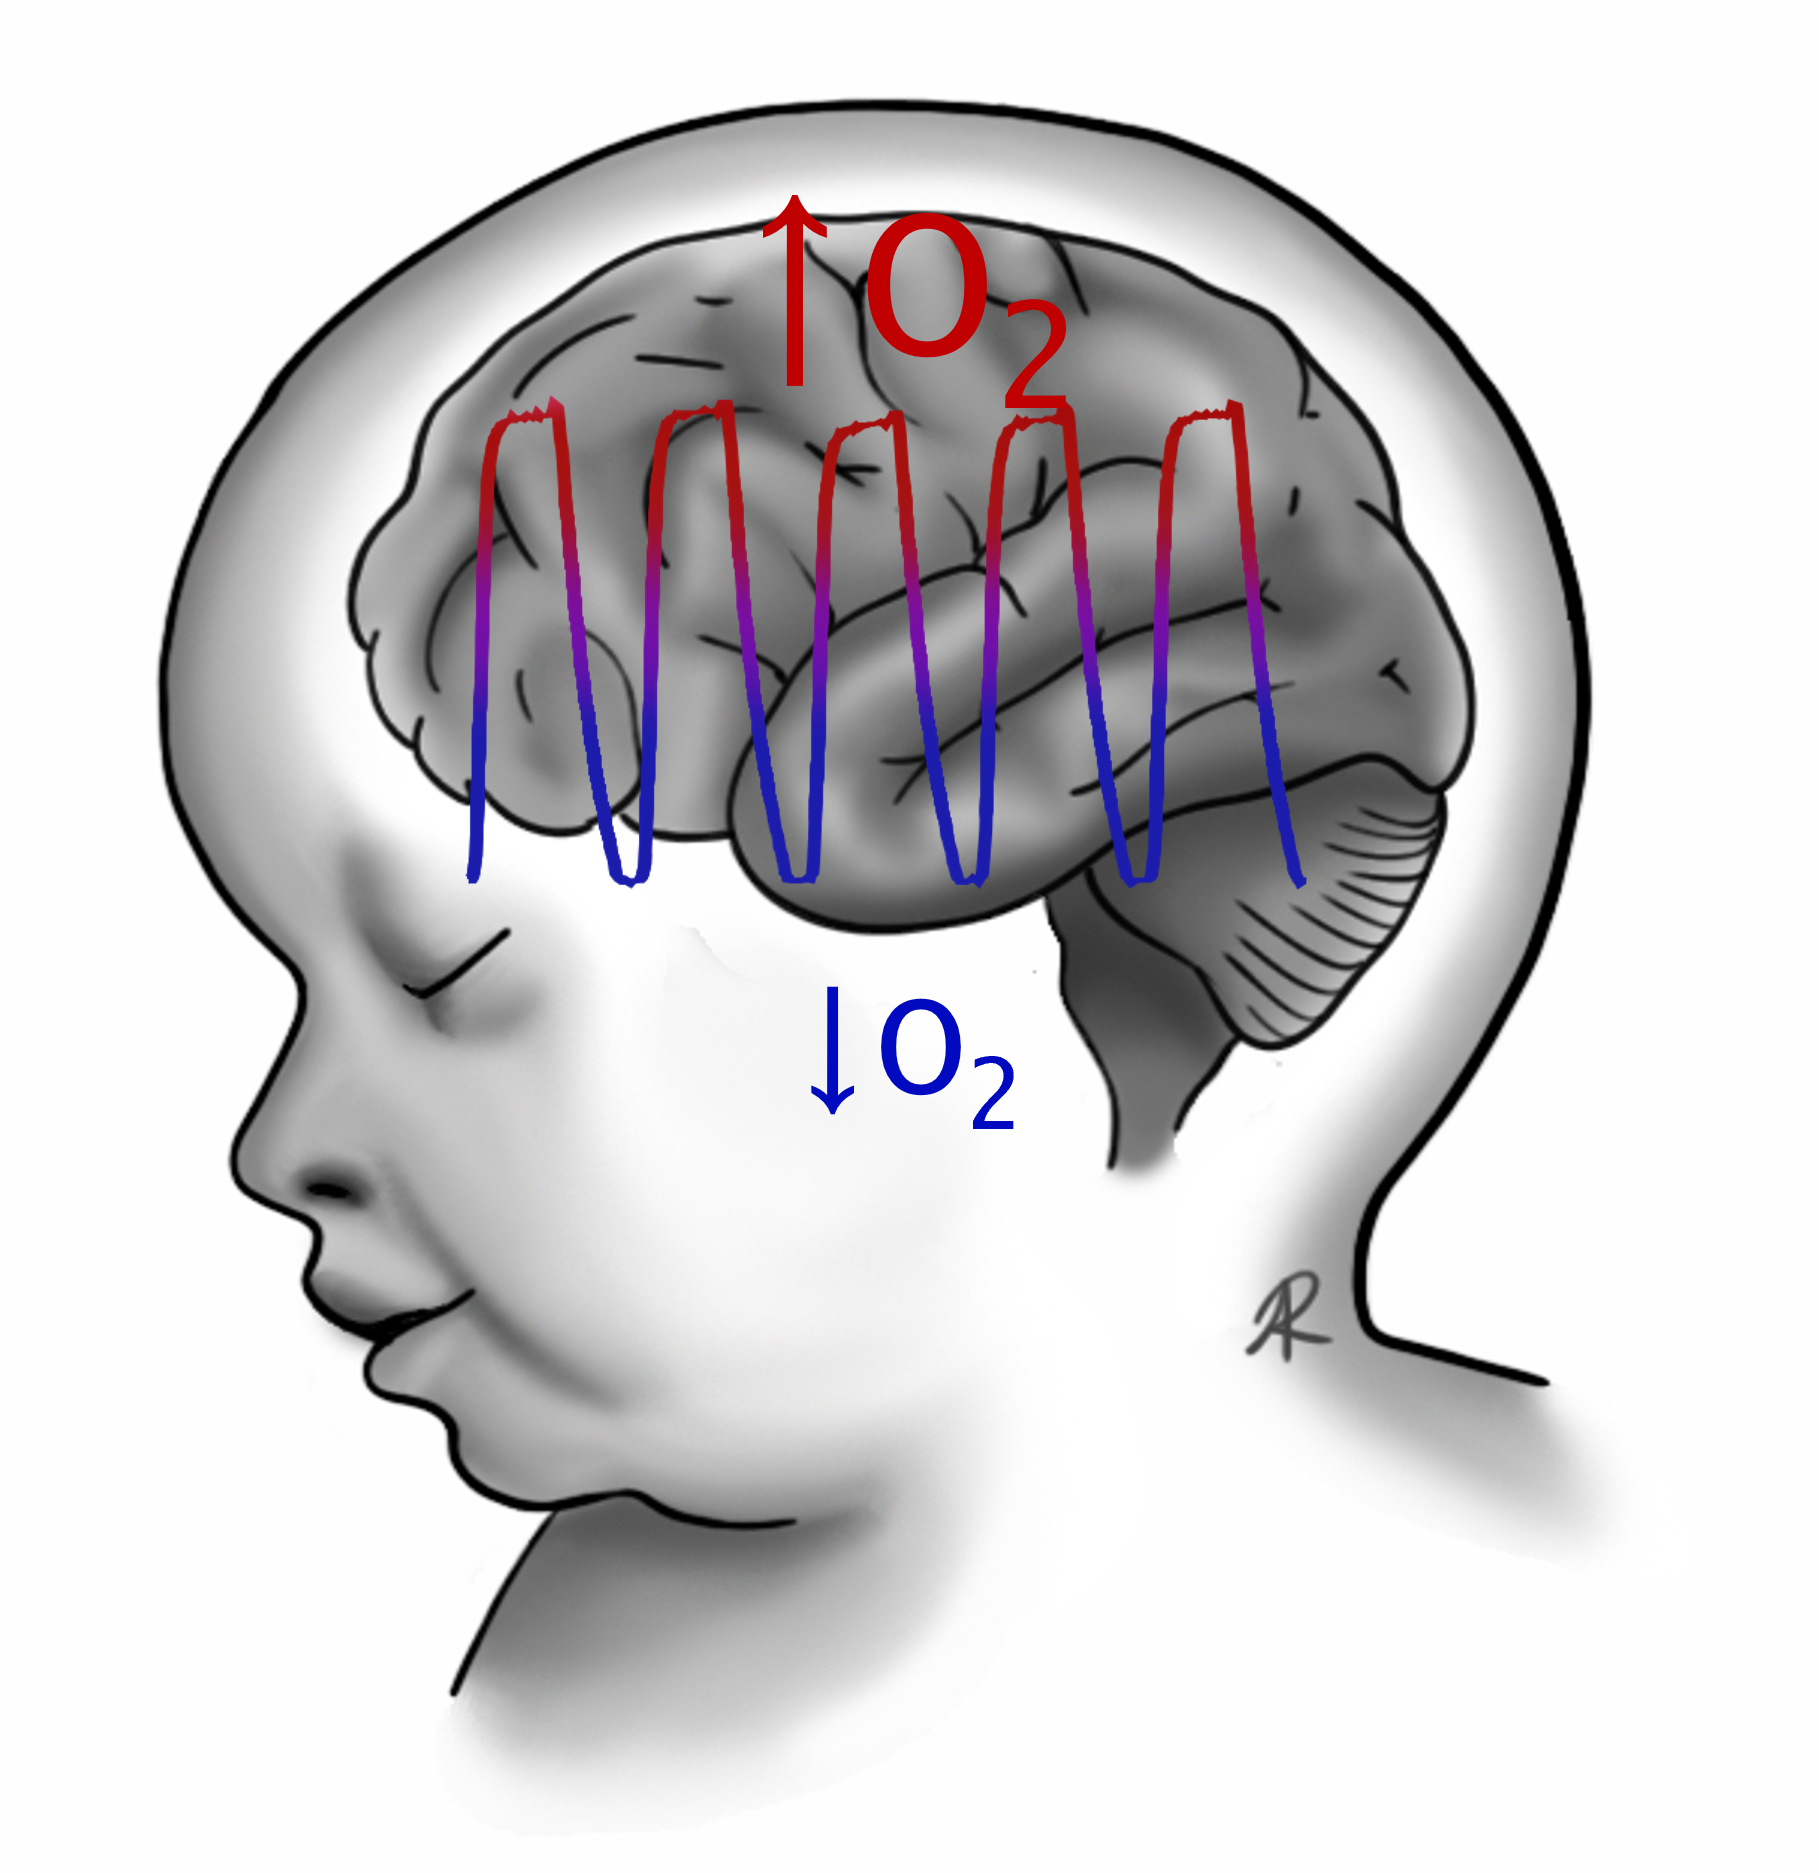 An illustration of a newborn's brain subjected to intermittent hypoxia